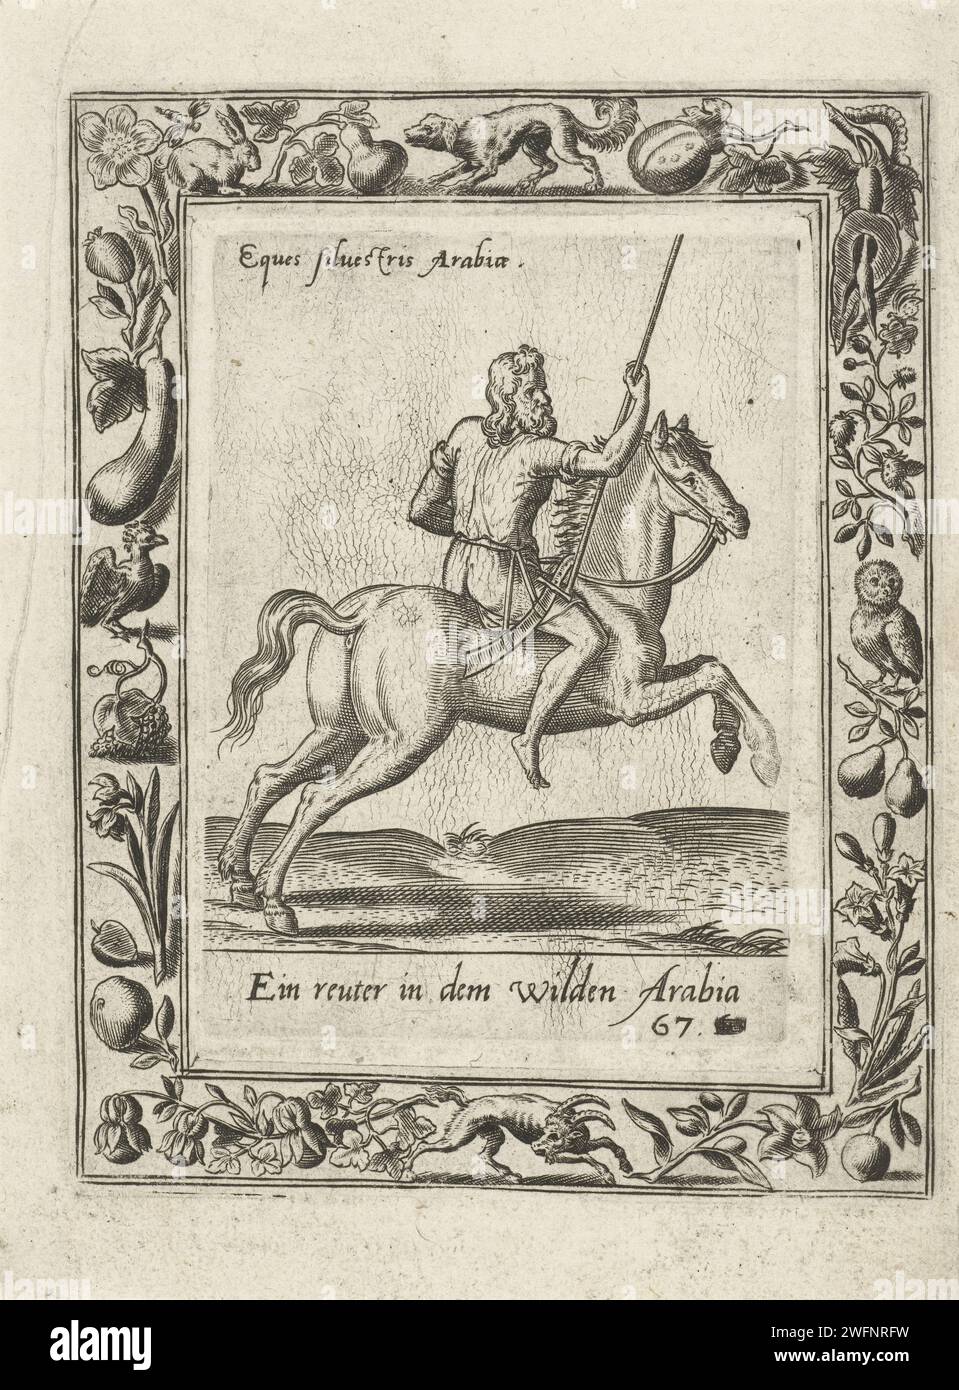 Arabic rider, Abraham de Bruyn (attributed to), 1577  Cartouche with image of horse and rider to the right. The horse is in a gallop. The rider is an Arab. He drives without a saddle and has a spear in his hand. The print has a German caption and Latin inscription. Print originally from 'Equitum Descripcio ...', 1577. Cologne paper engraving warfare; military affairs (+ cavalry, horsemen). folk costume, regional costume. Asiatic races and peoples (with NAME). (military) uniforms Stock Photo